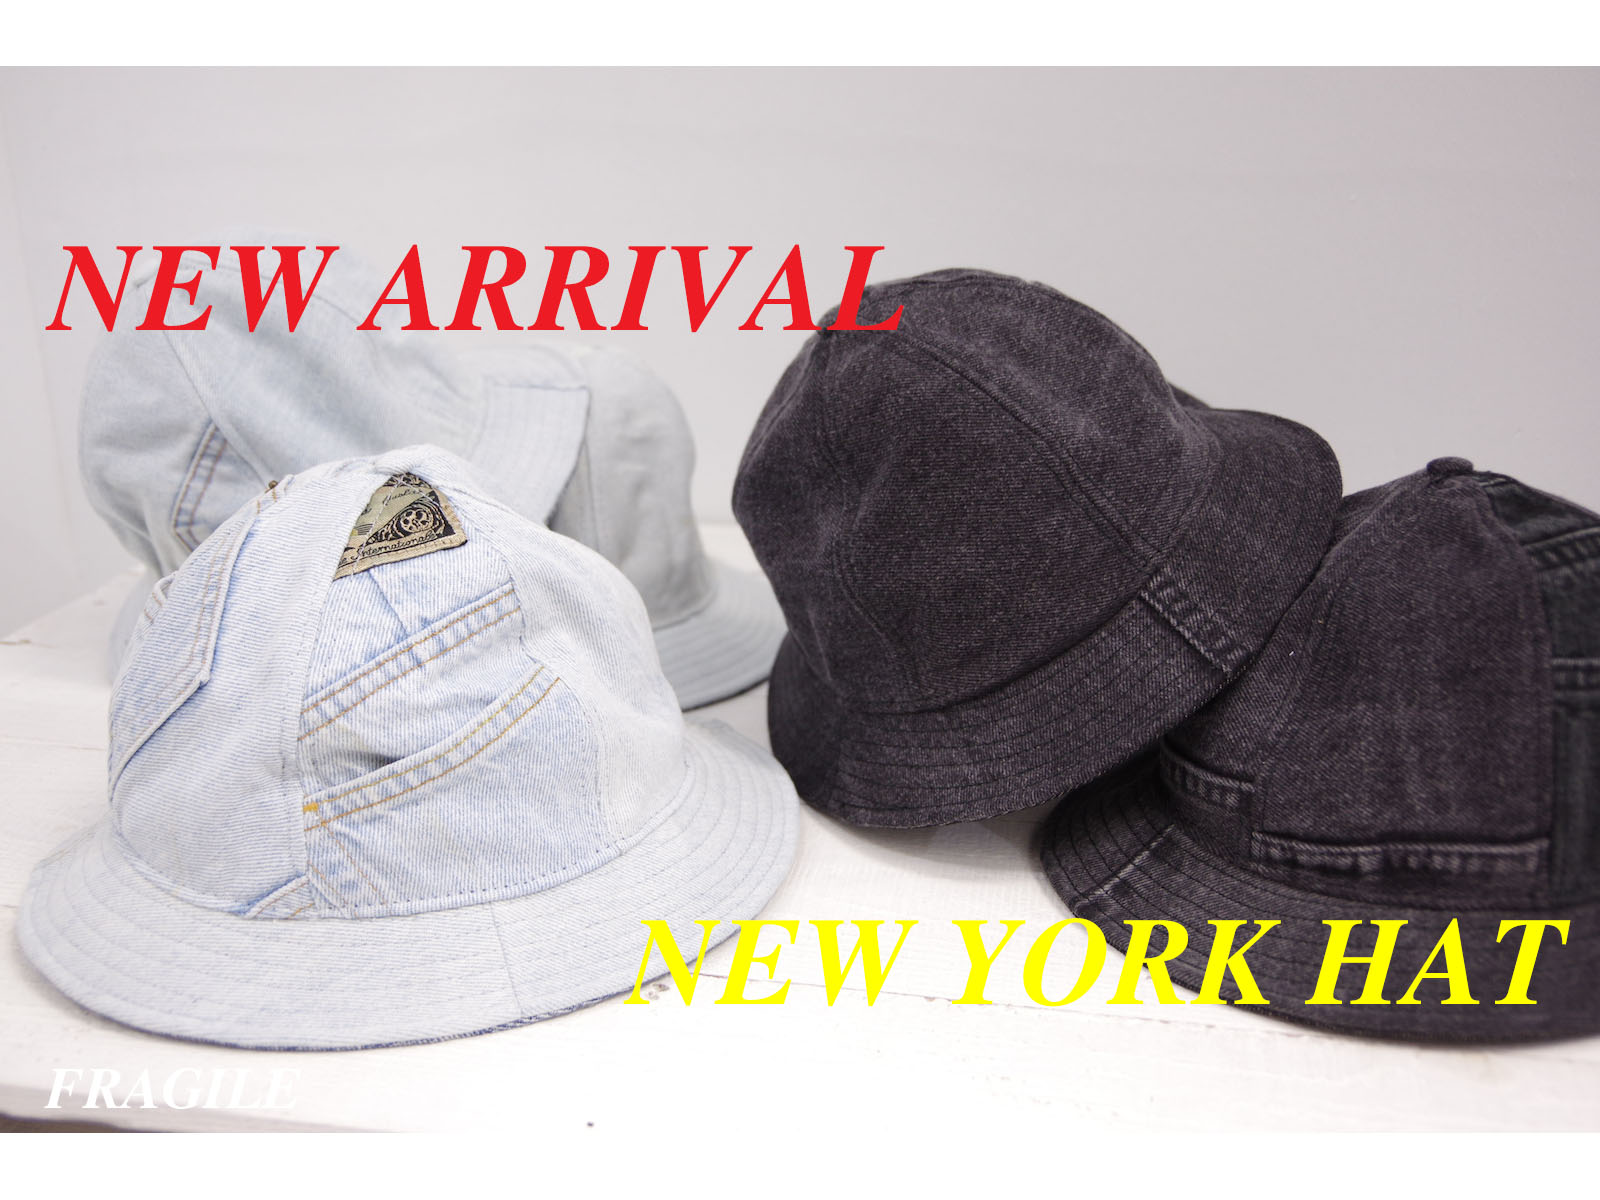 NEW ARRIVAL – NEW YORK HAT SPRING 2016